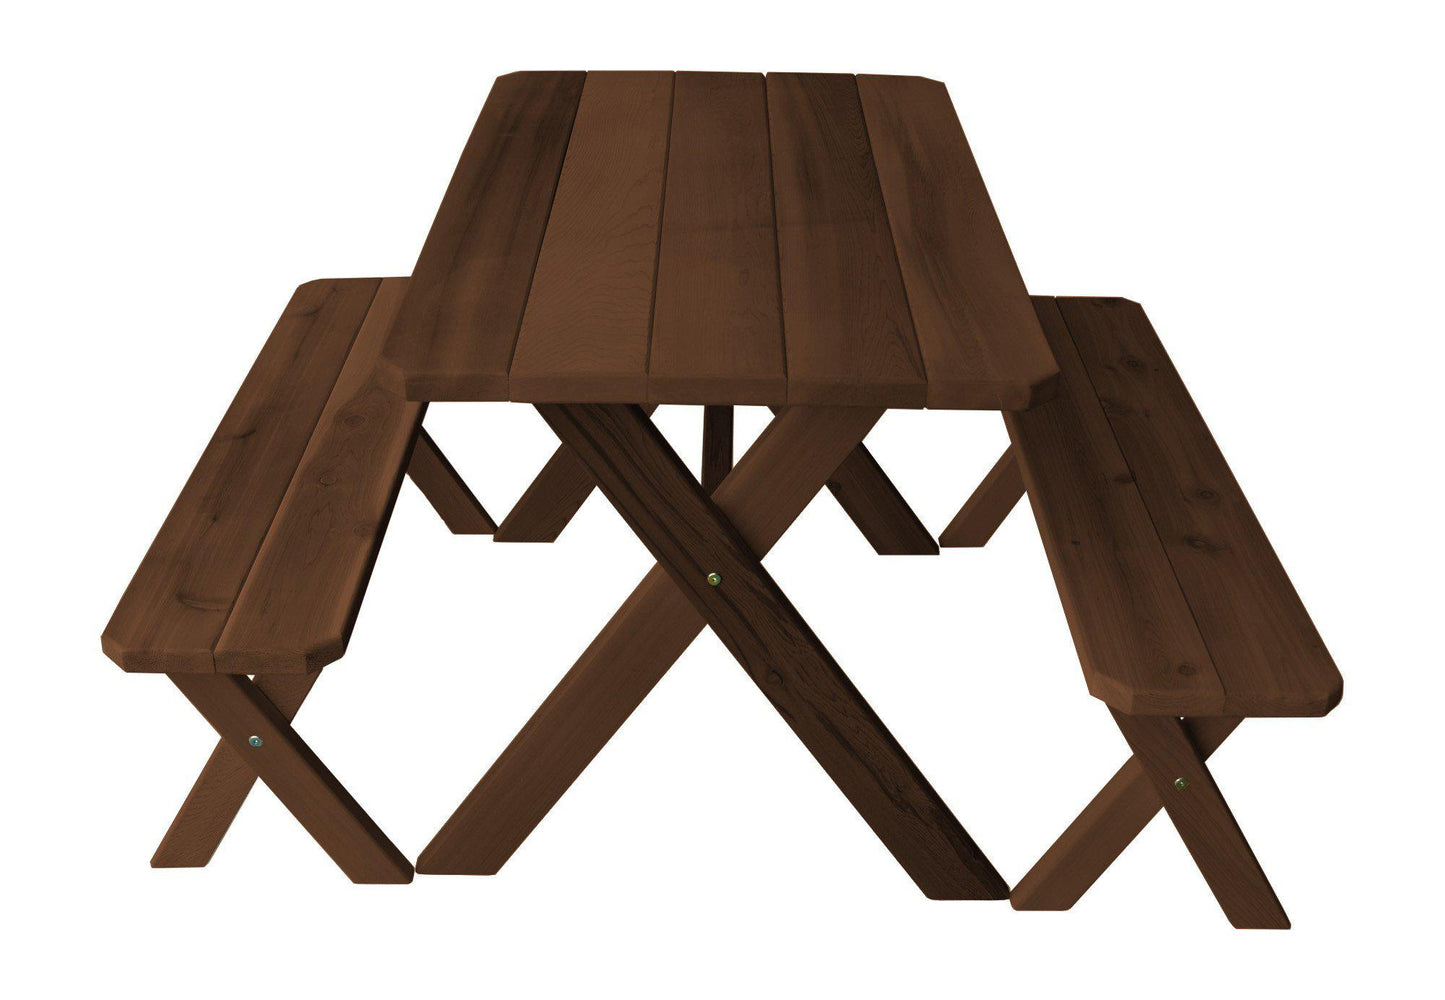 A&L FURNITURE CO. Western Red Cedar 5' Cross-leg Table w/2 Benches - Specify for FREE 2" Umbrella Hole - LEAD TIME TO SHIP 2 WEEKS